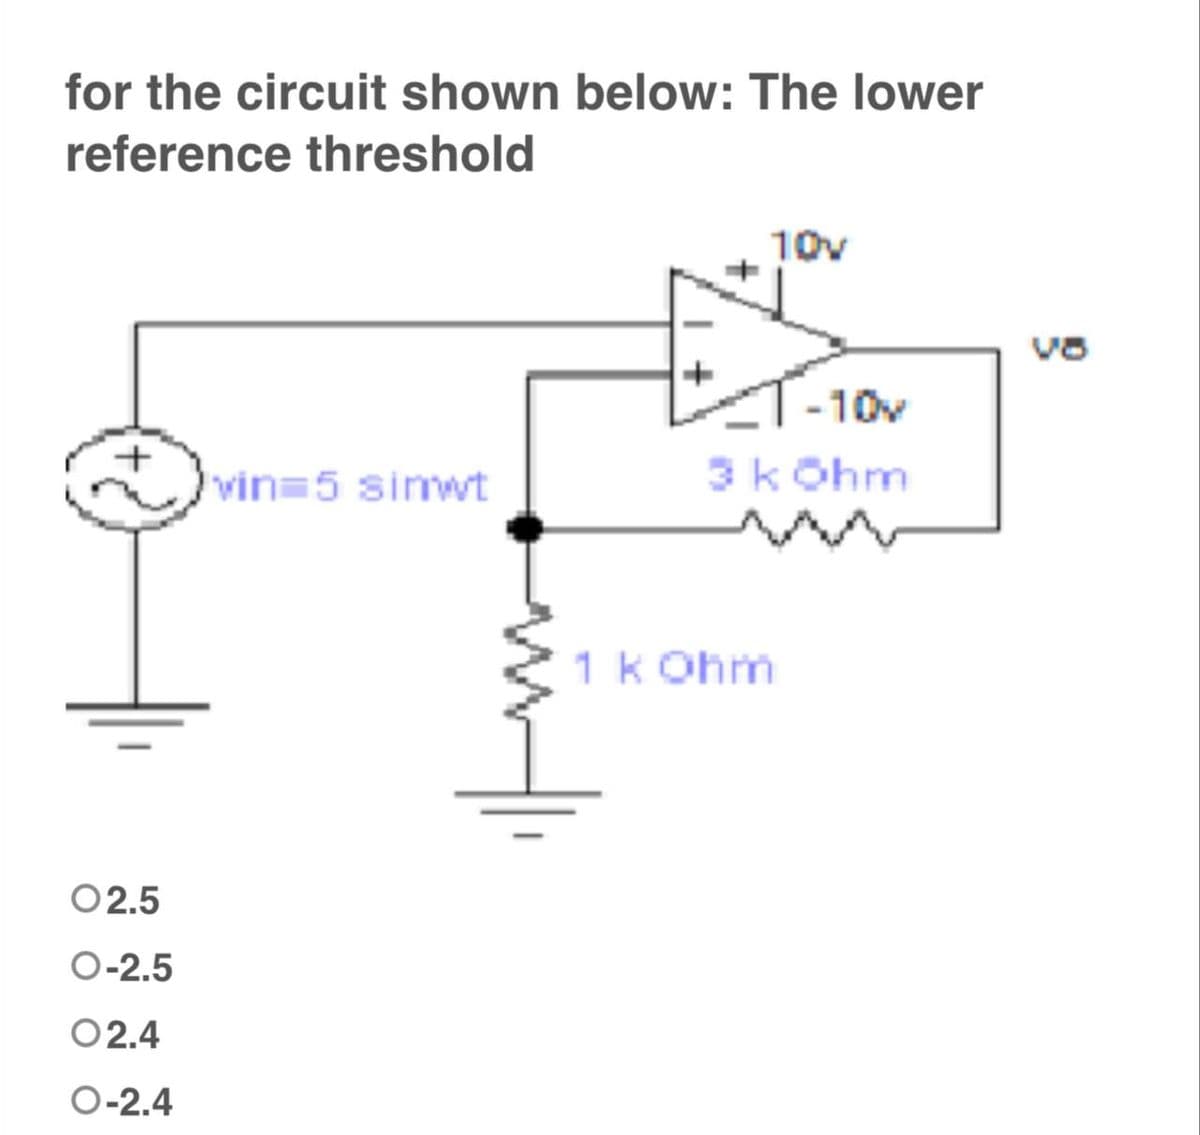 for the circuit shown below: The lower
reference threshold
10v
T-10v
3 kOhm
vin=5 sinwt
02.5
O-2.5
02.4
O-2.4
1 k Ohm